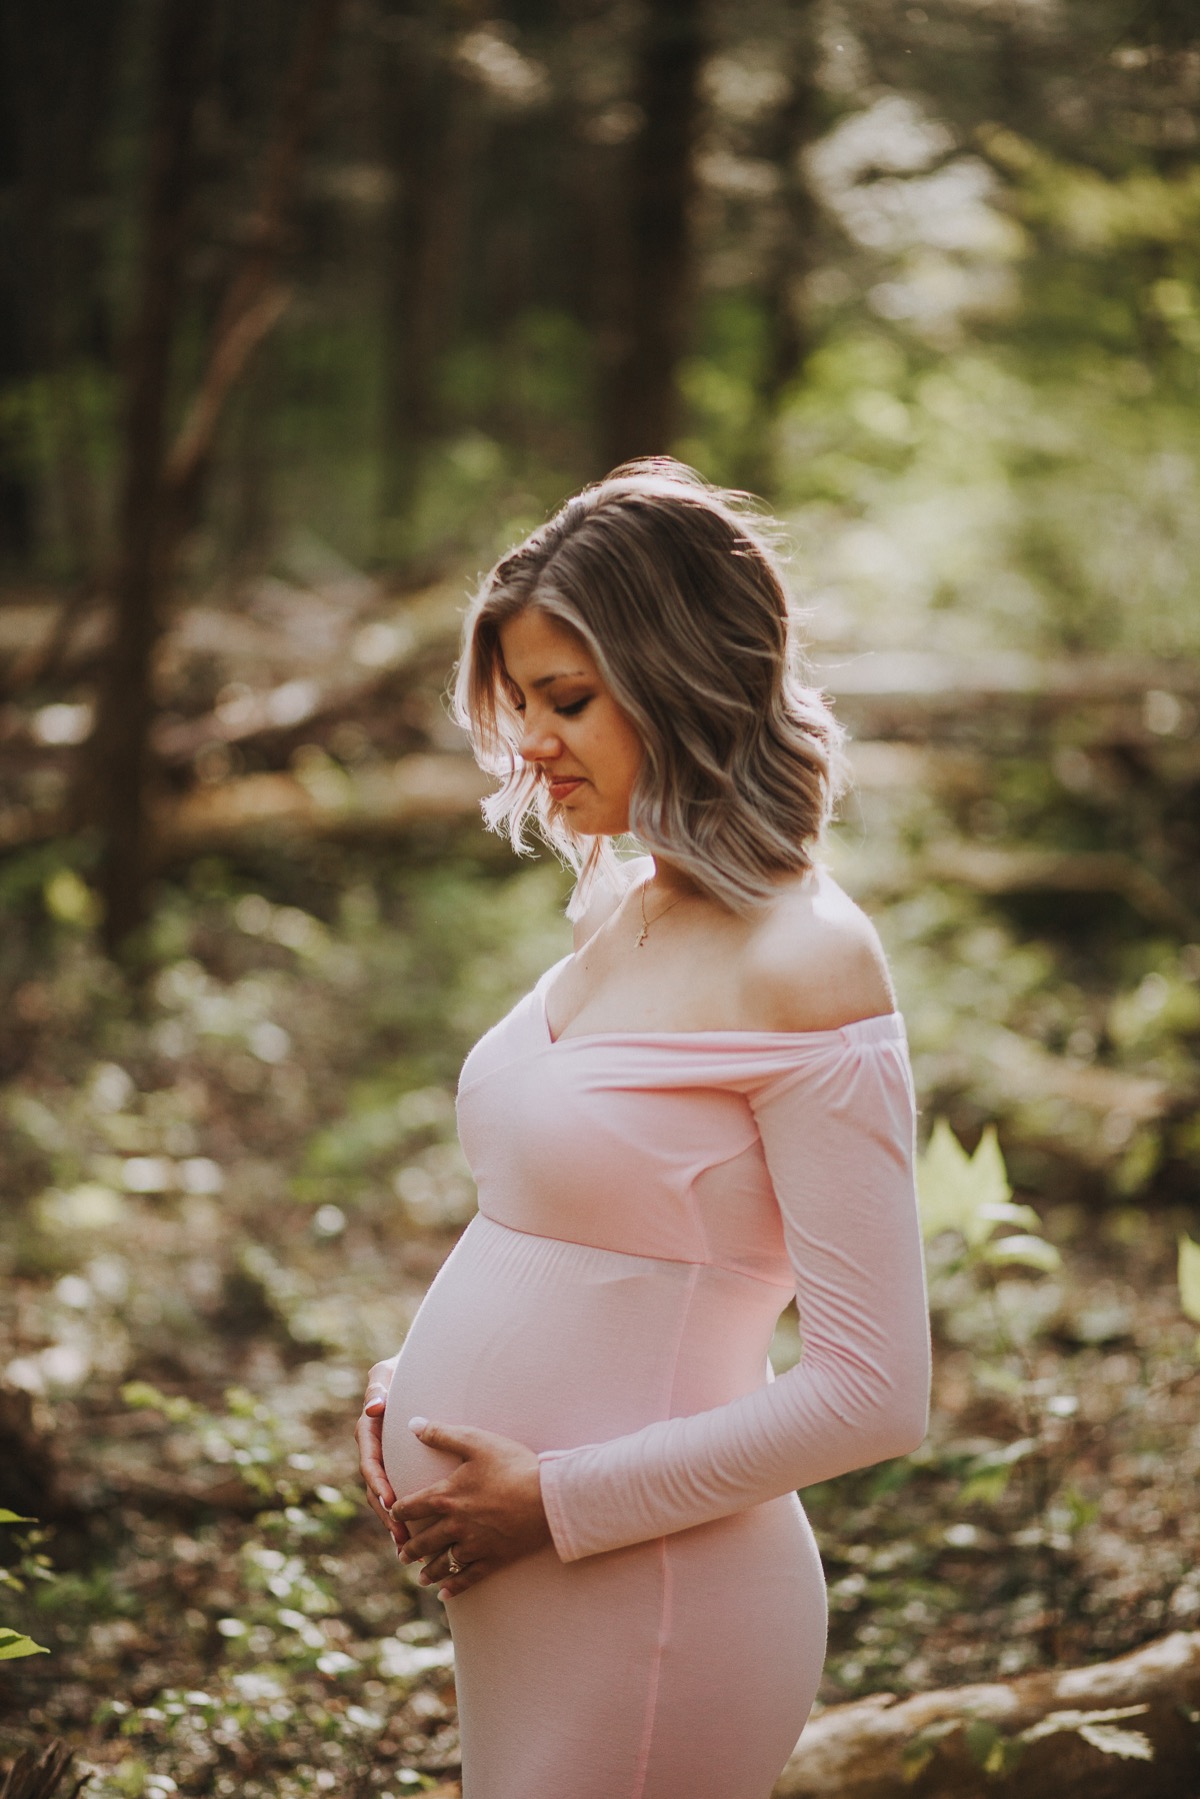 Maternity Photography Gatlinburg Photographers Pigeon Forge Engagement Photos Townsend Tennessee Photographer Wears Valley TN